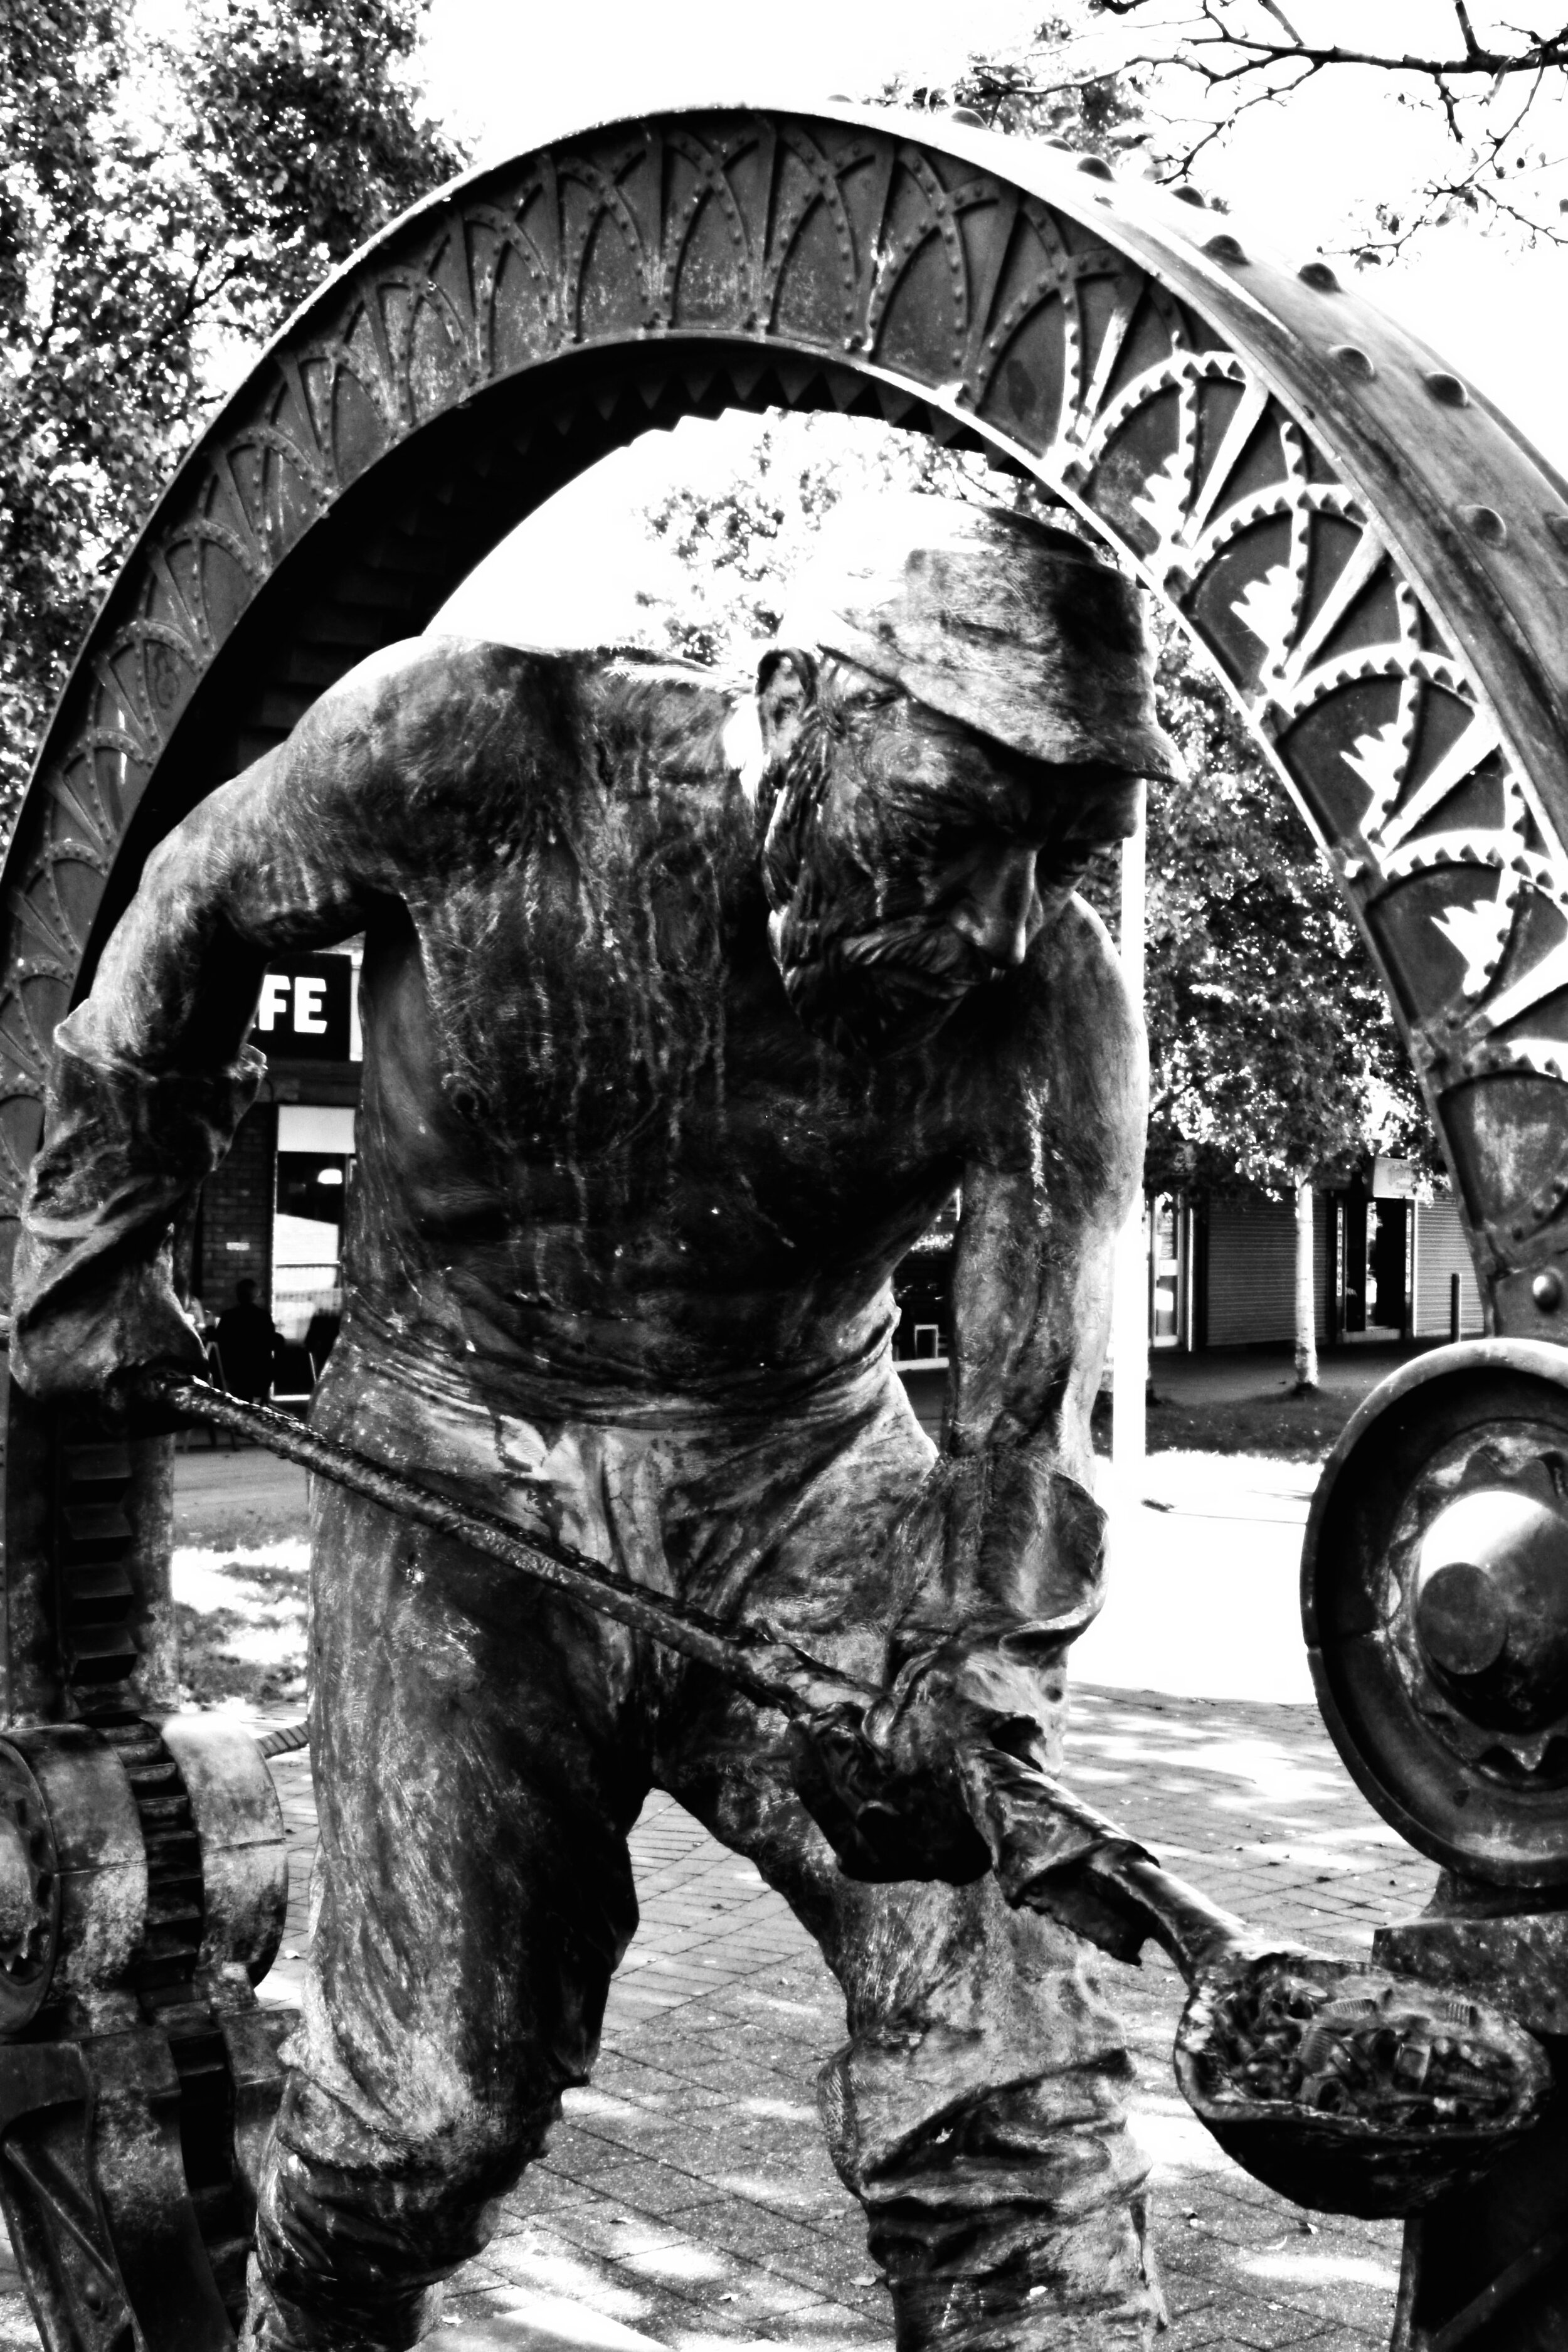 The statue ‘the Mortal Coil’ captures the spirit of zealous steel workers, who continue to work despite the threats to their livelihoods and to the future of their town. 